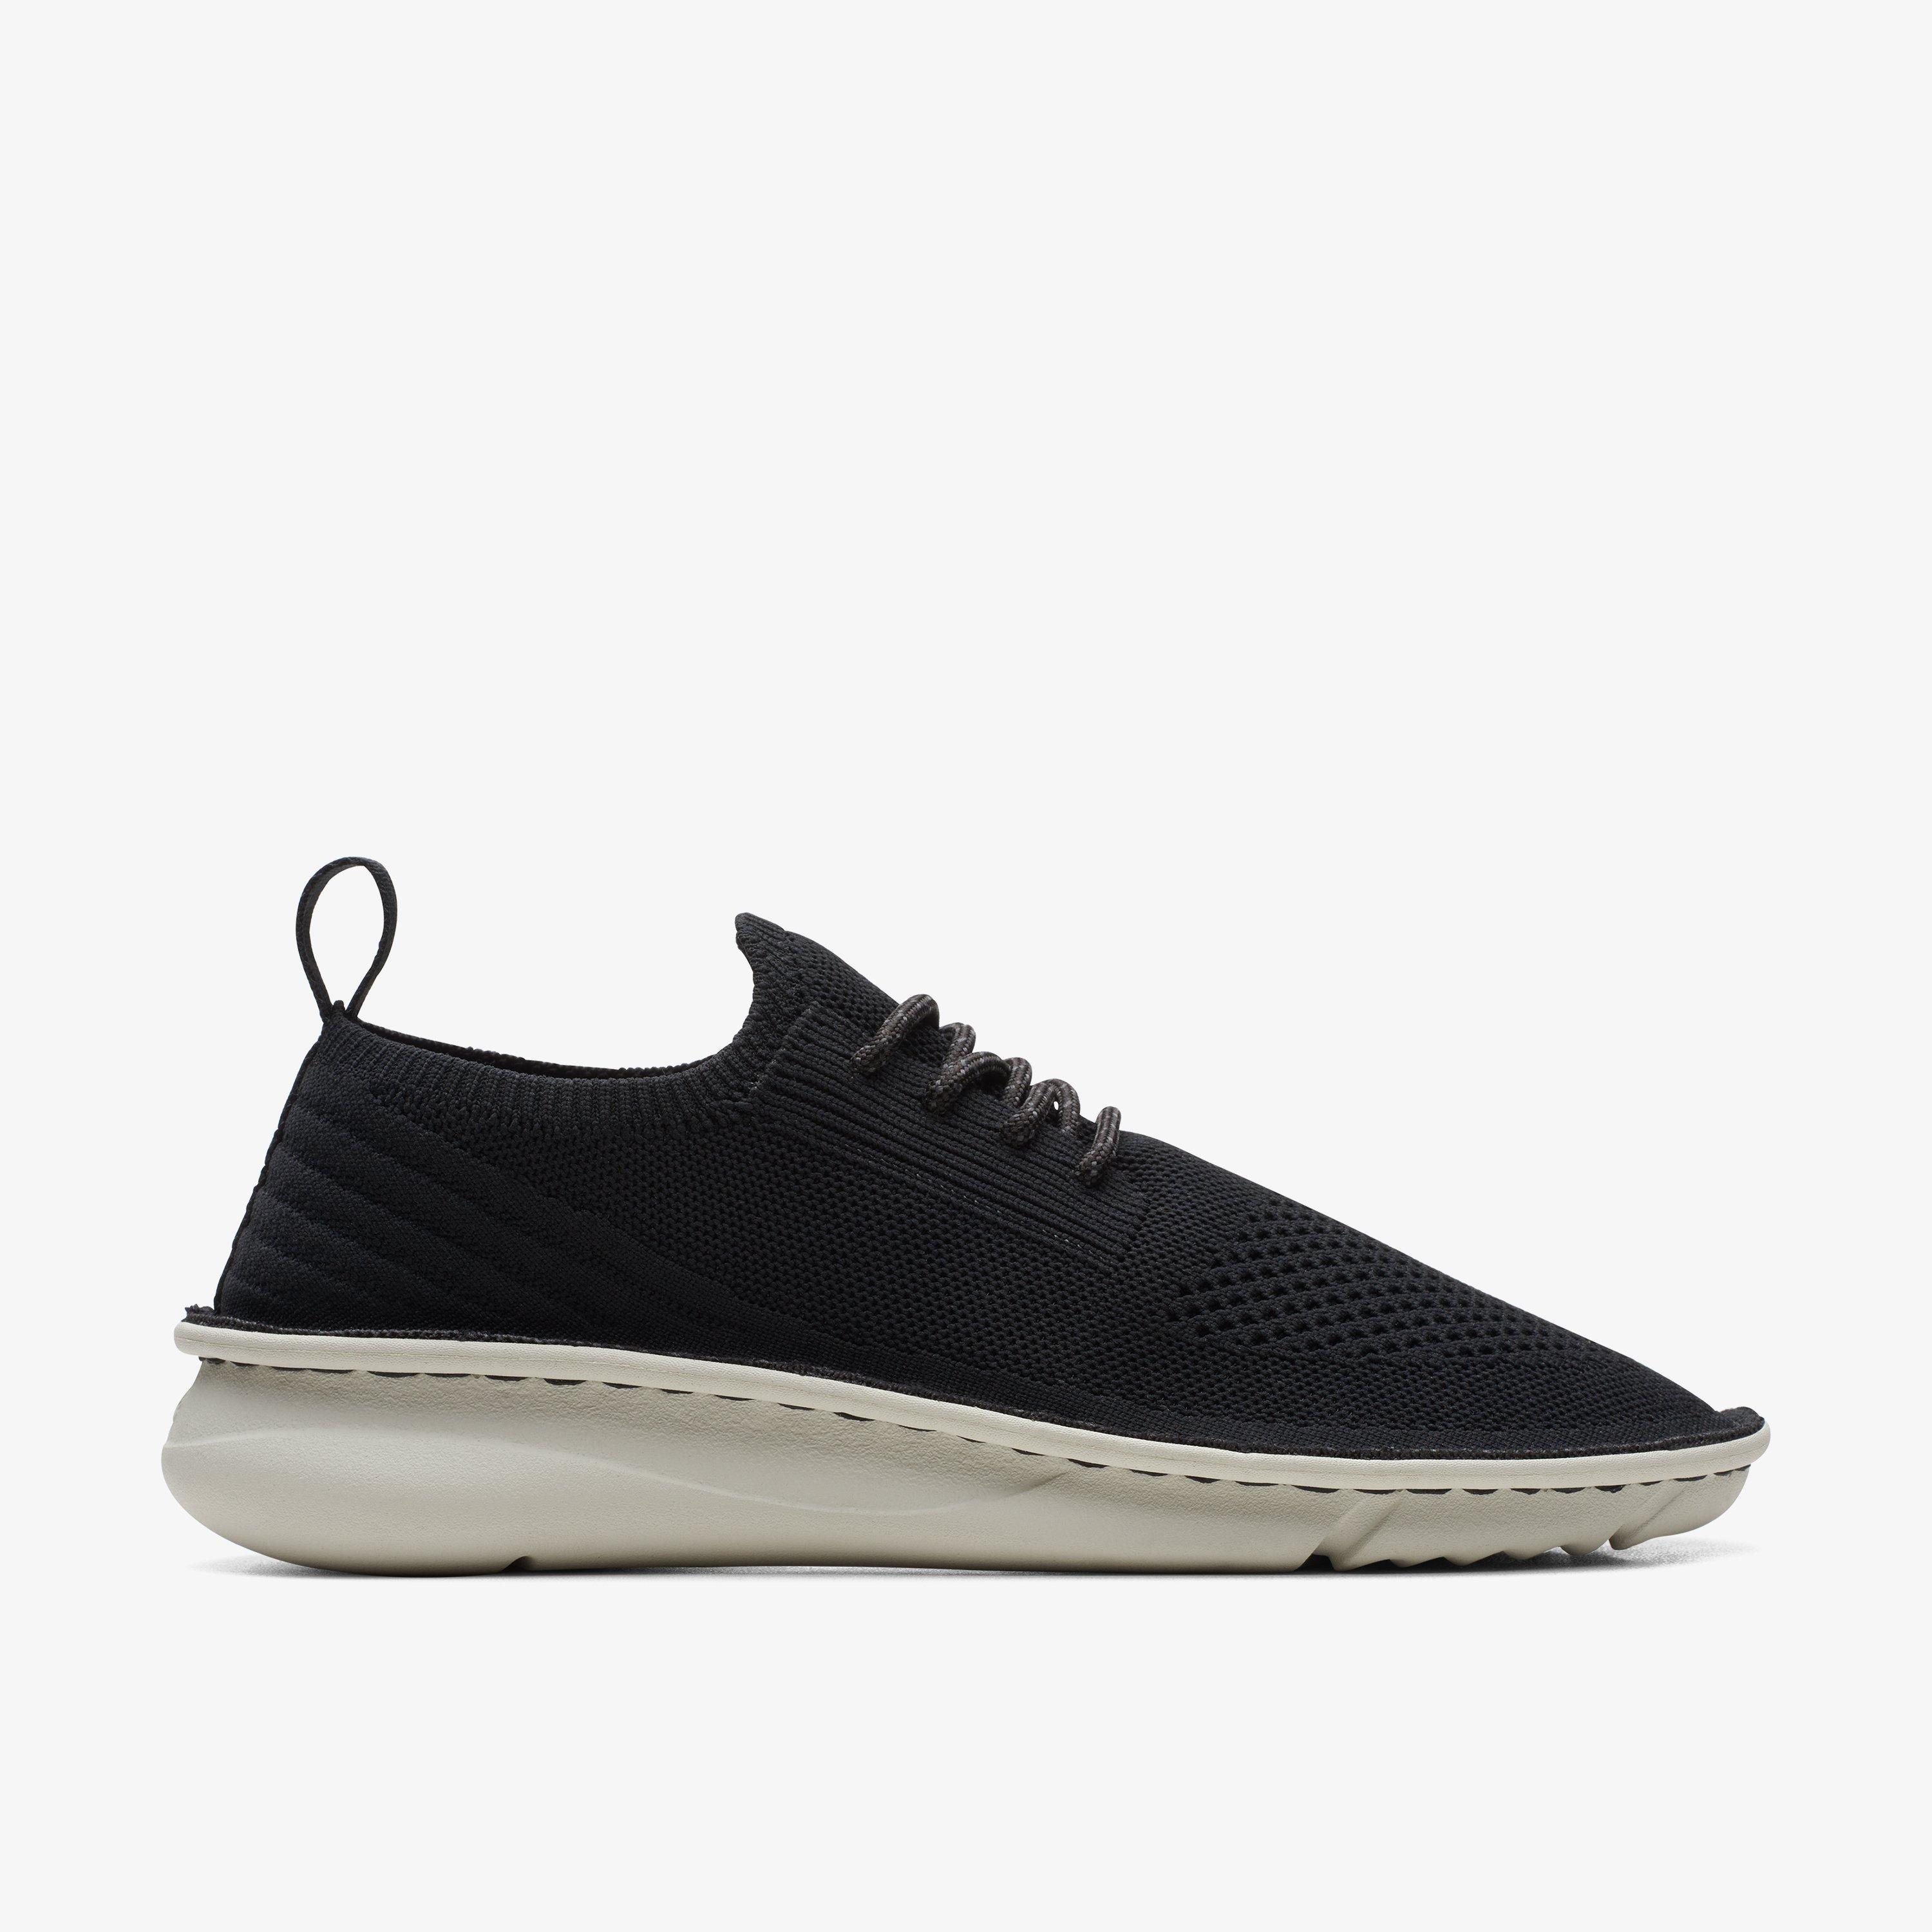 WOMENS Clarks Origin2 Black Knit Trainers | Clarks Outlet